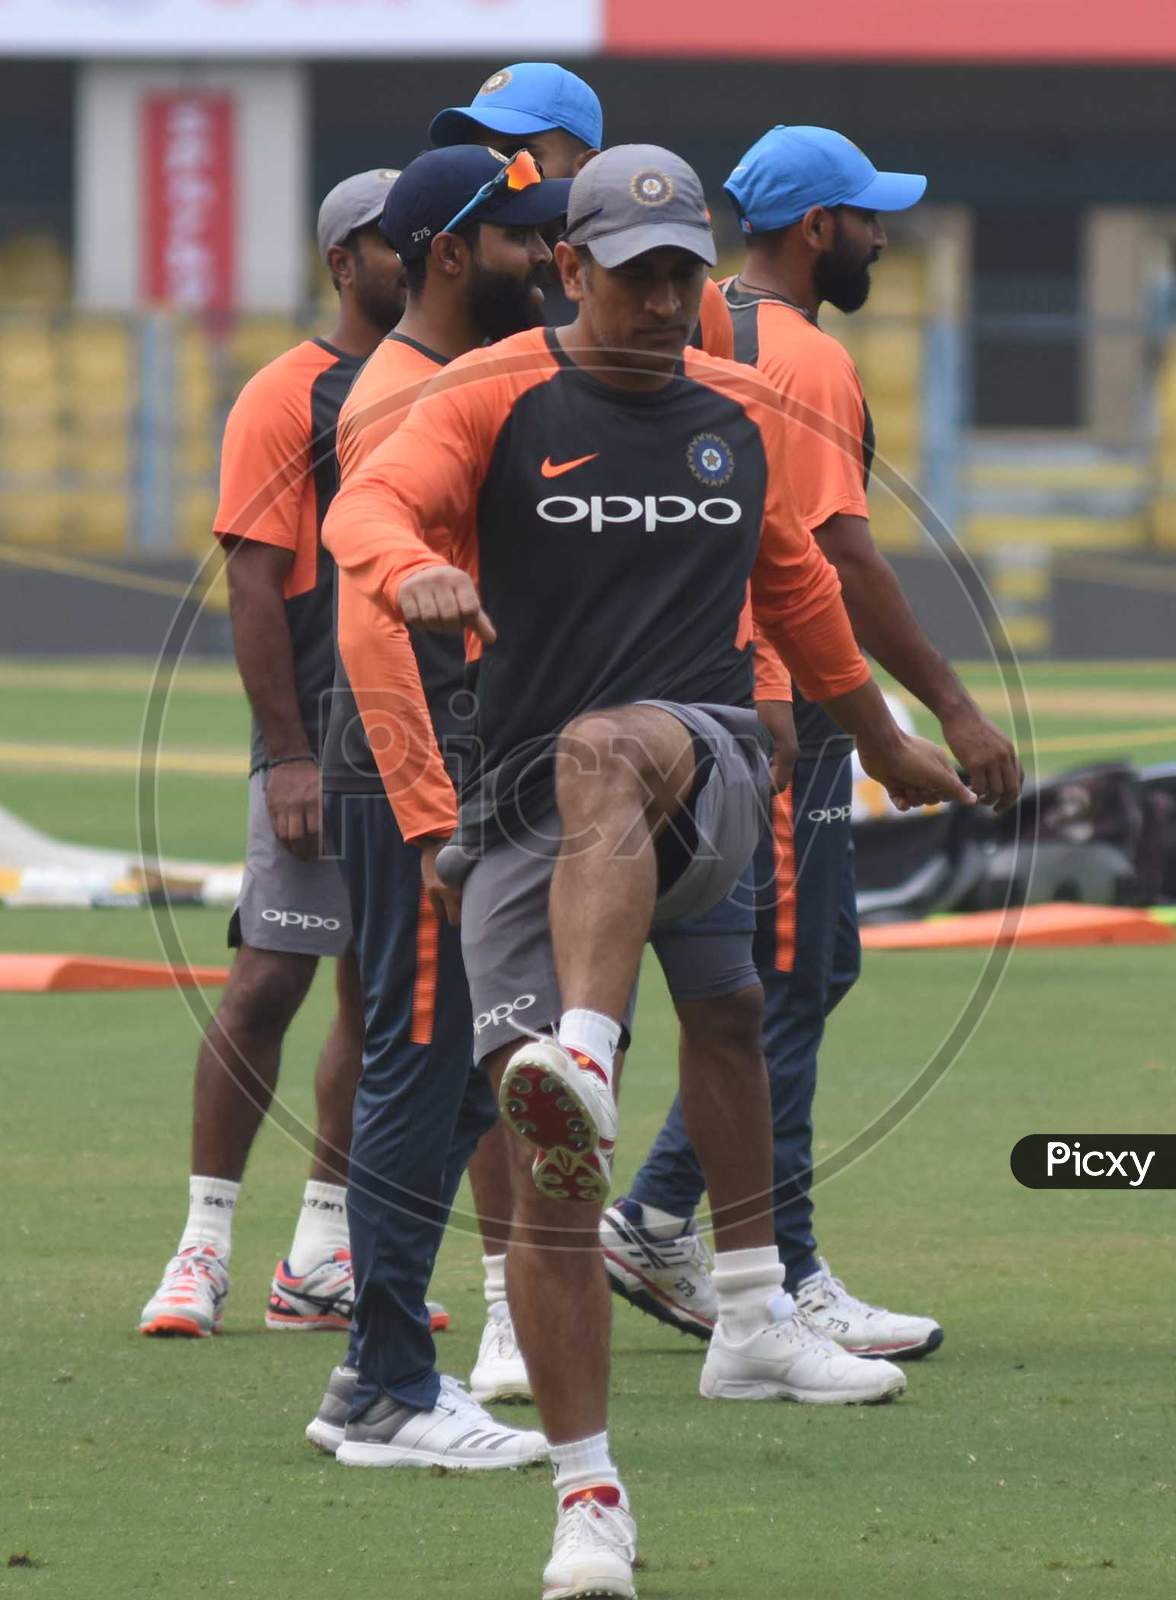 Team India Player  M.S Dhoni Plays During A Practice Session Ahead Of The First One Day International Cricket Match Against West Indies, At Aca Cricket Stadium, Barsapara In Guwahati